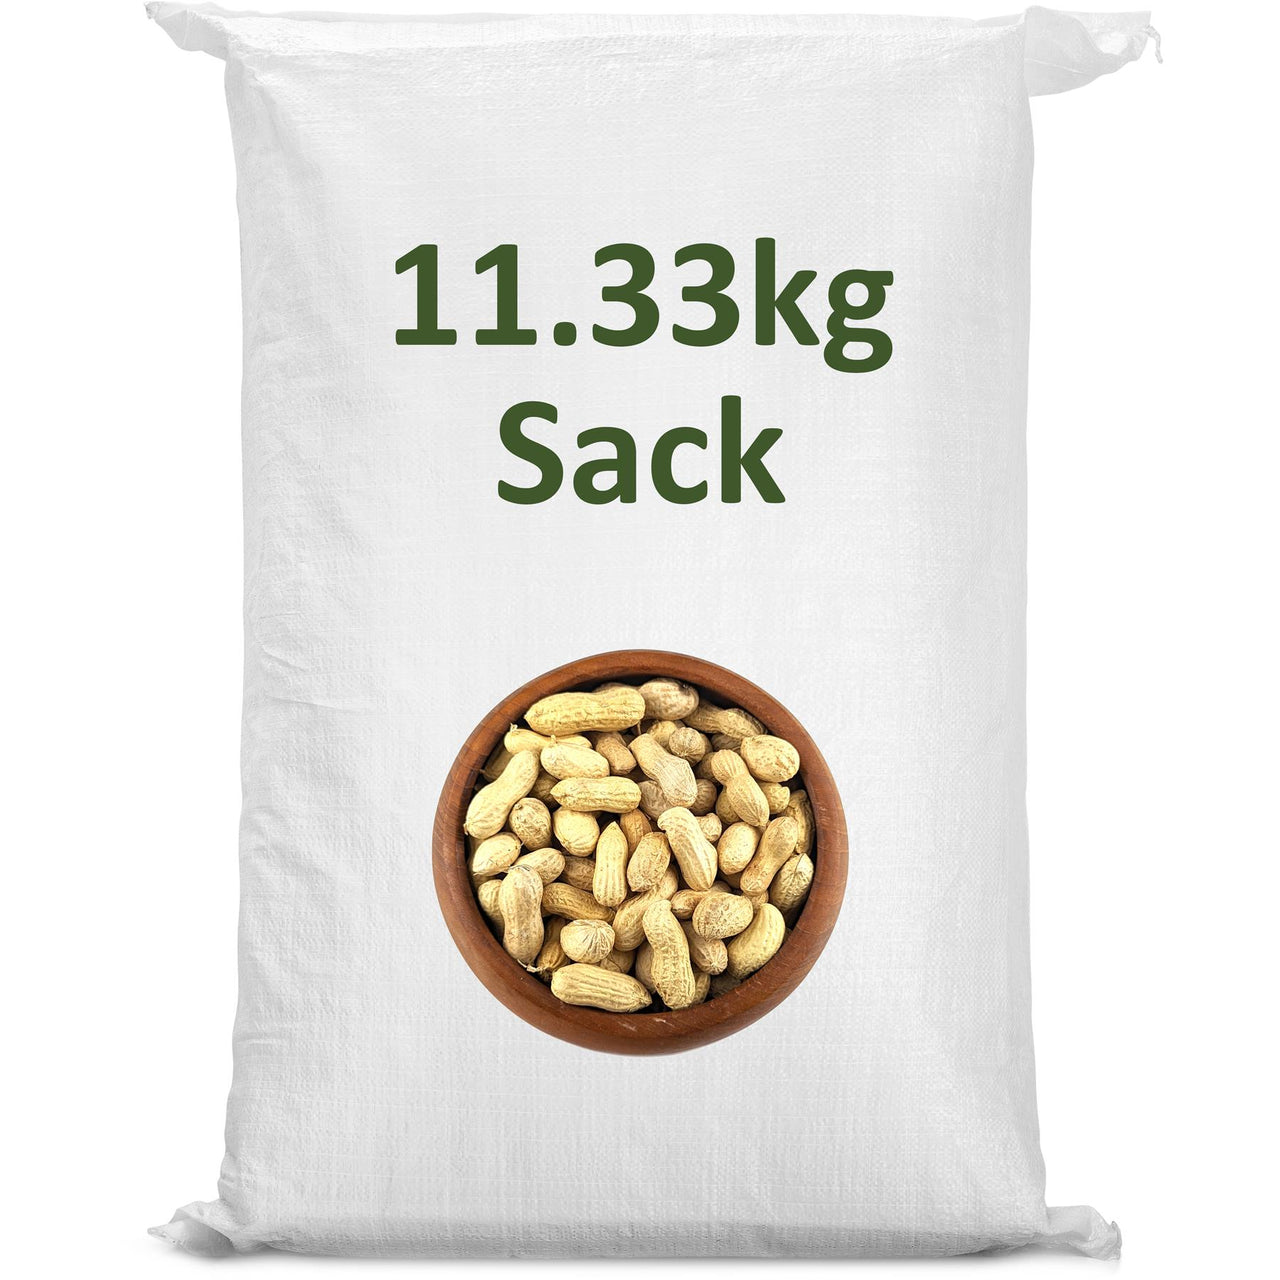 Peanuts in Shell, 11.33kg Sack